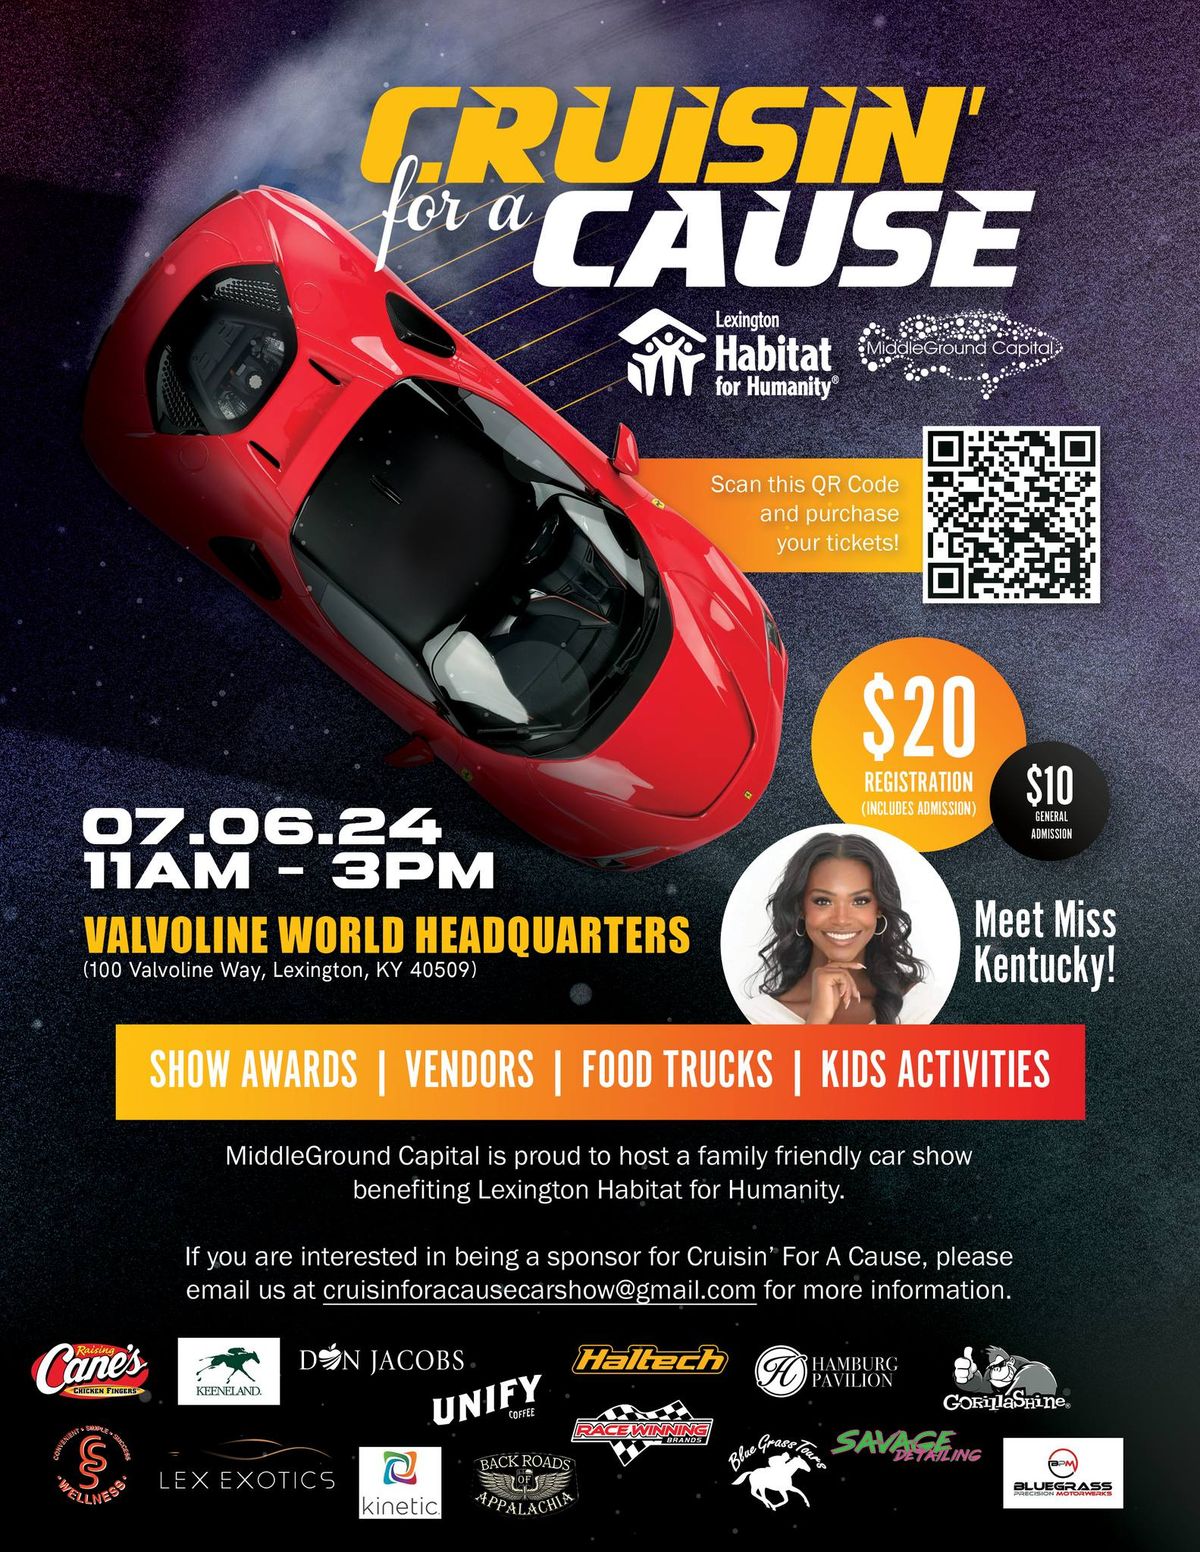 Cruisin' For A Cause